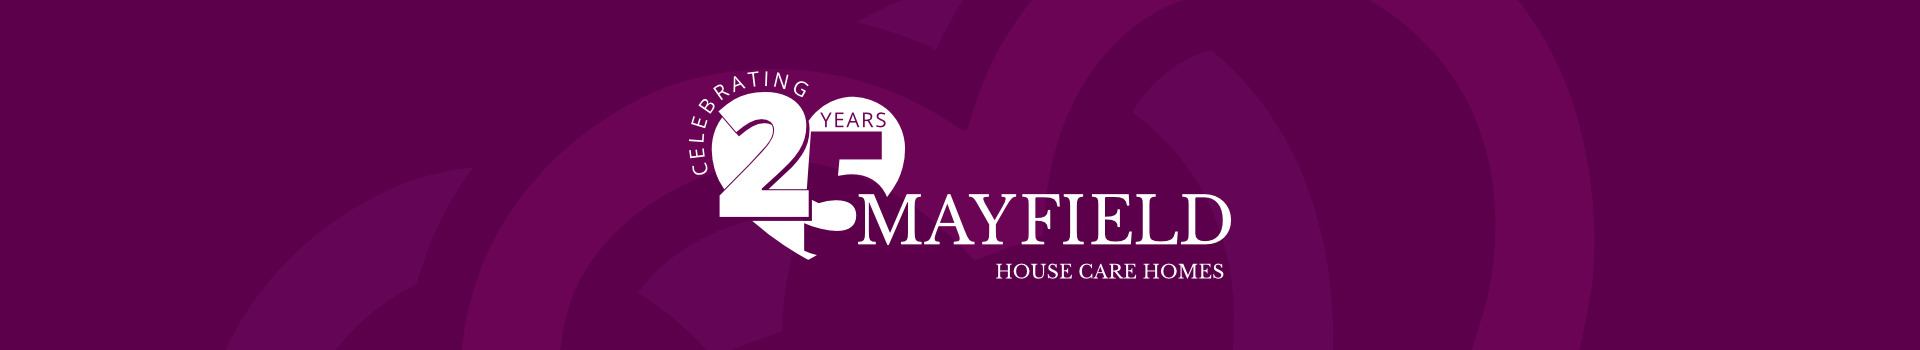 25th anniversary mayfield house header